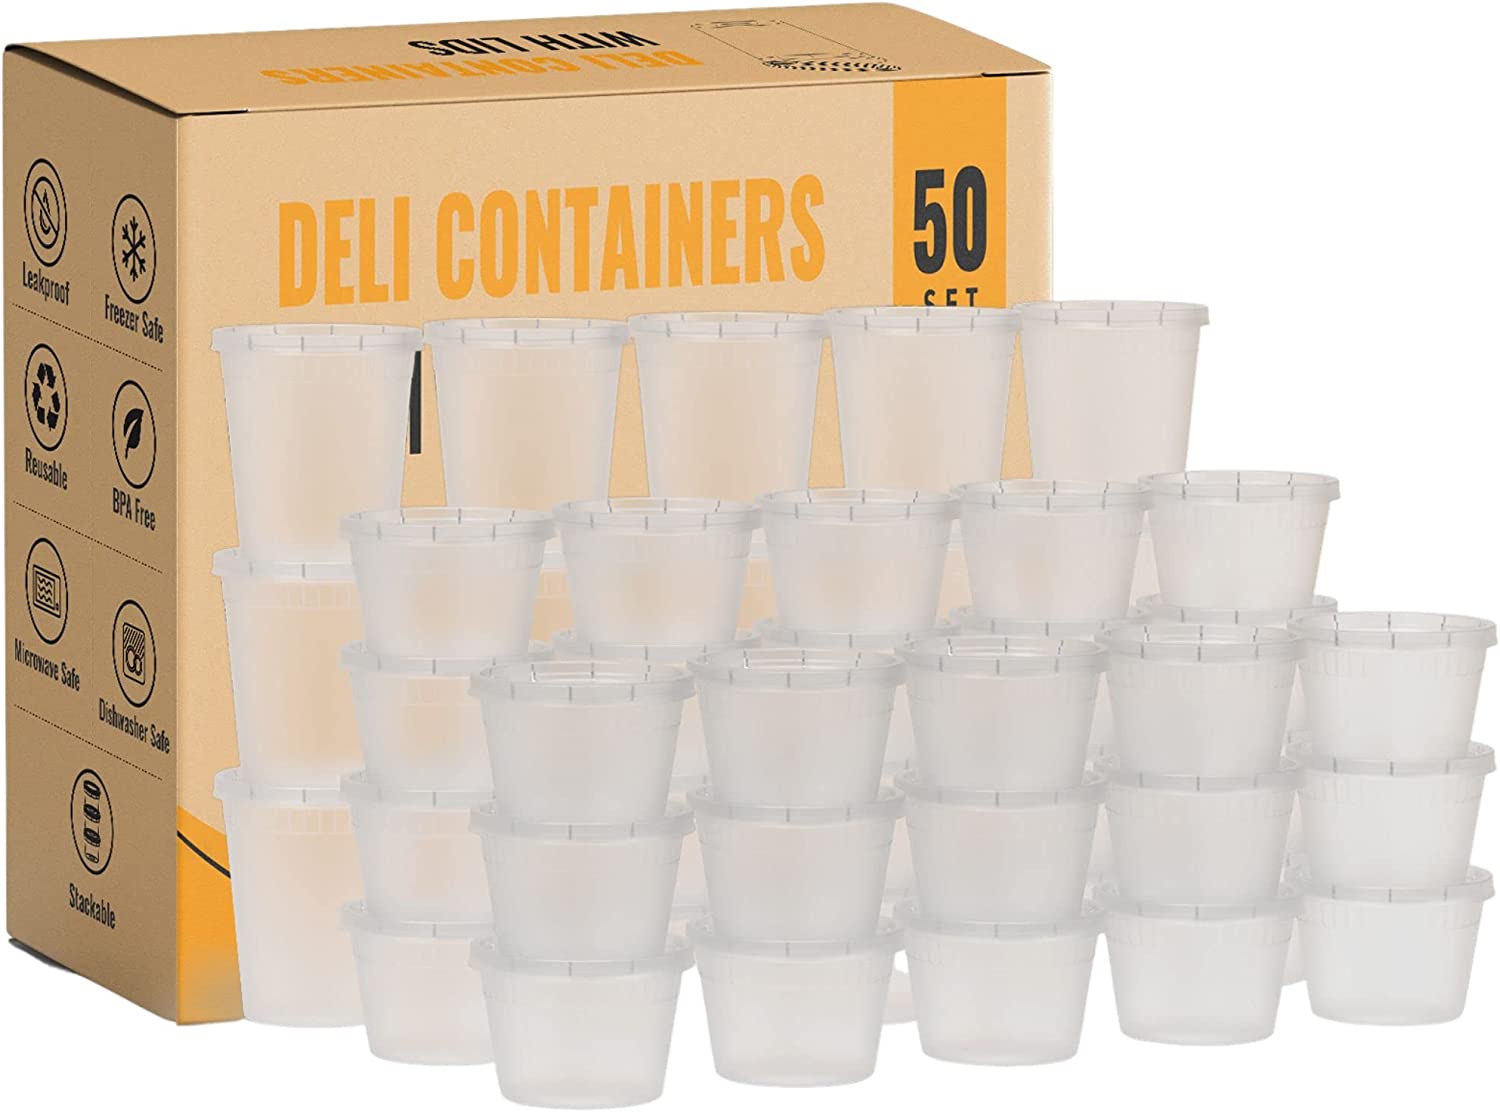 Deli Containers with Lids - Quart Containers with lids - Soup Freezer  Containers, 50-Pack BPA Free 16 oz, 32 oz, Cup Pint Quart